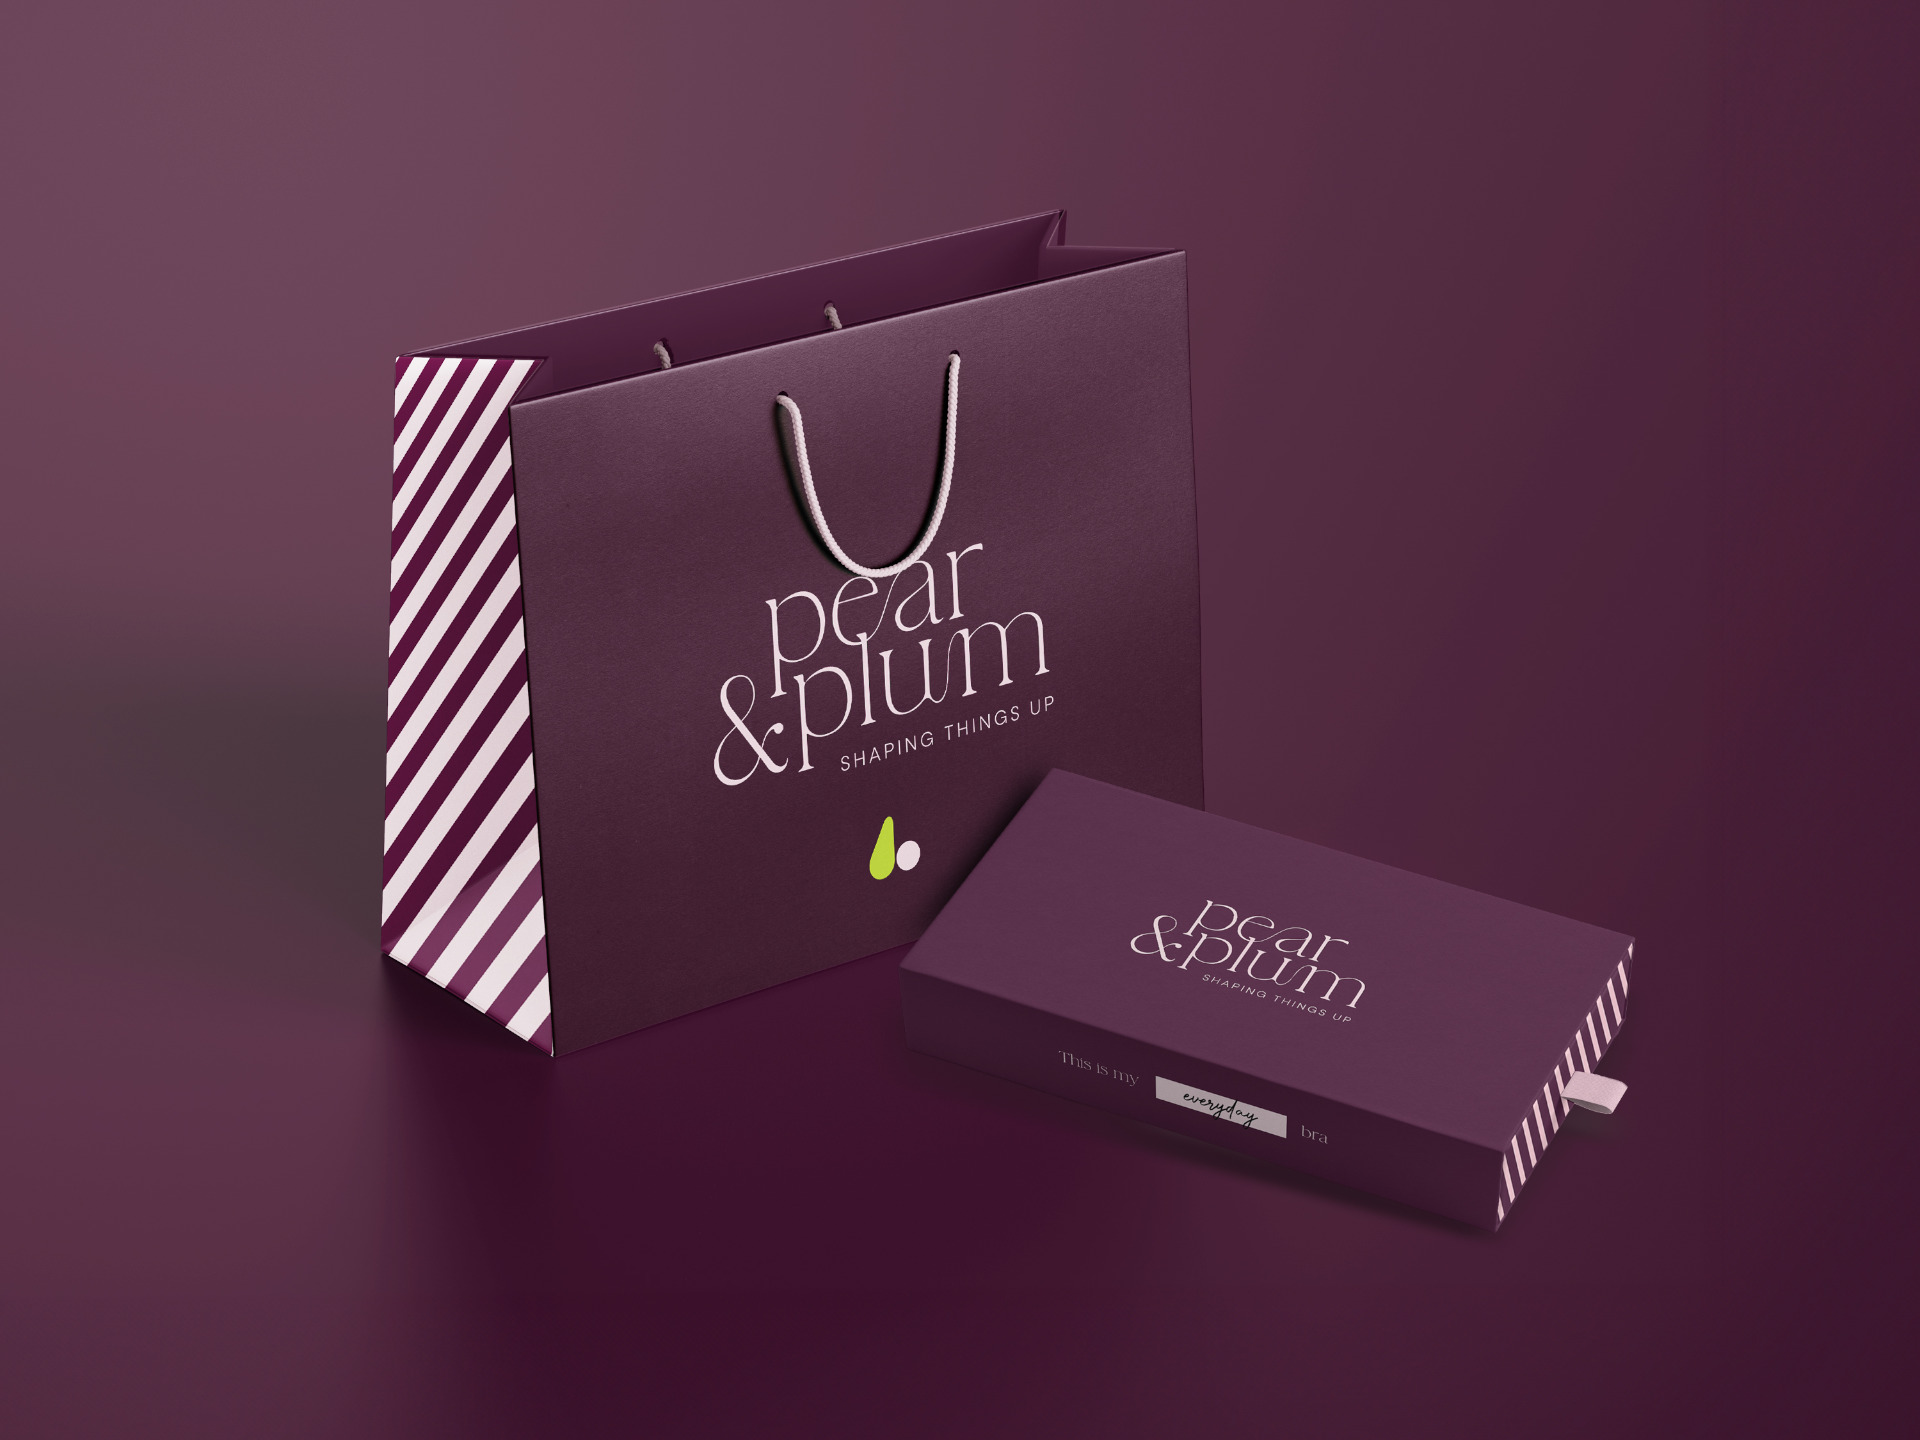 A purple bag and box with Pear & Plum brand logo